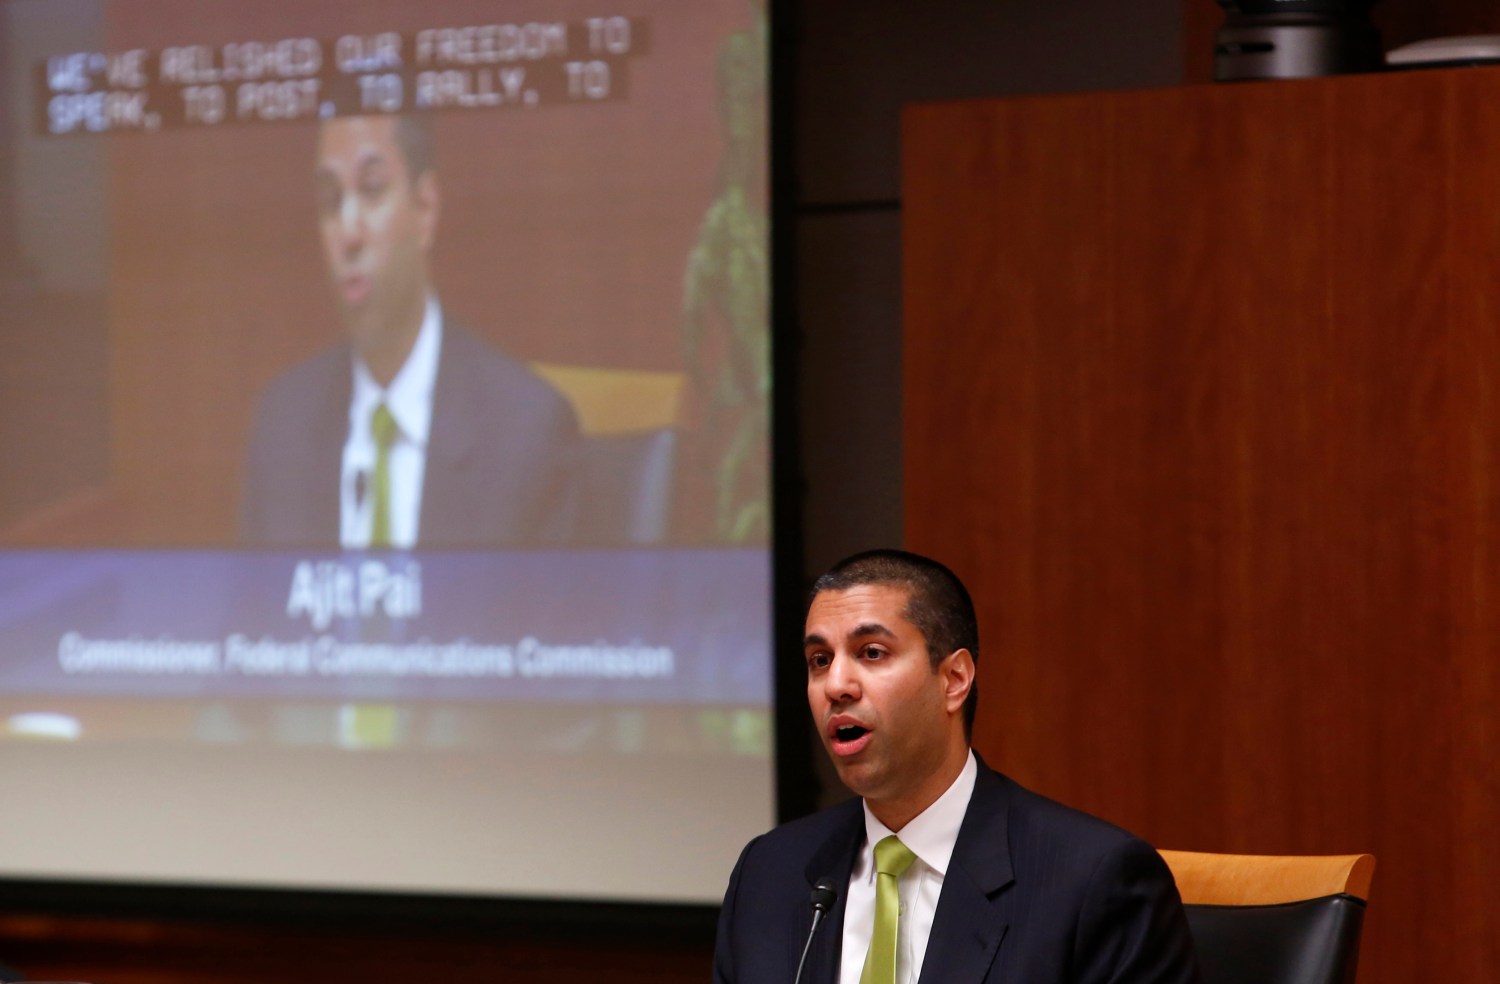 Federal Communications Commission (FCC) commissioner Ajit Pai speaks at a FCC Net Neutrality hearing in Washington February 26, 2015. The FCC is expected Thursday to approve Chairman Tom Wheeler's proposed "net neutrality" rules, regulating broadband providers more heavily than in the past and restricting their power to control download speeds on the web. REUTERS/Yuri Gripas